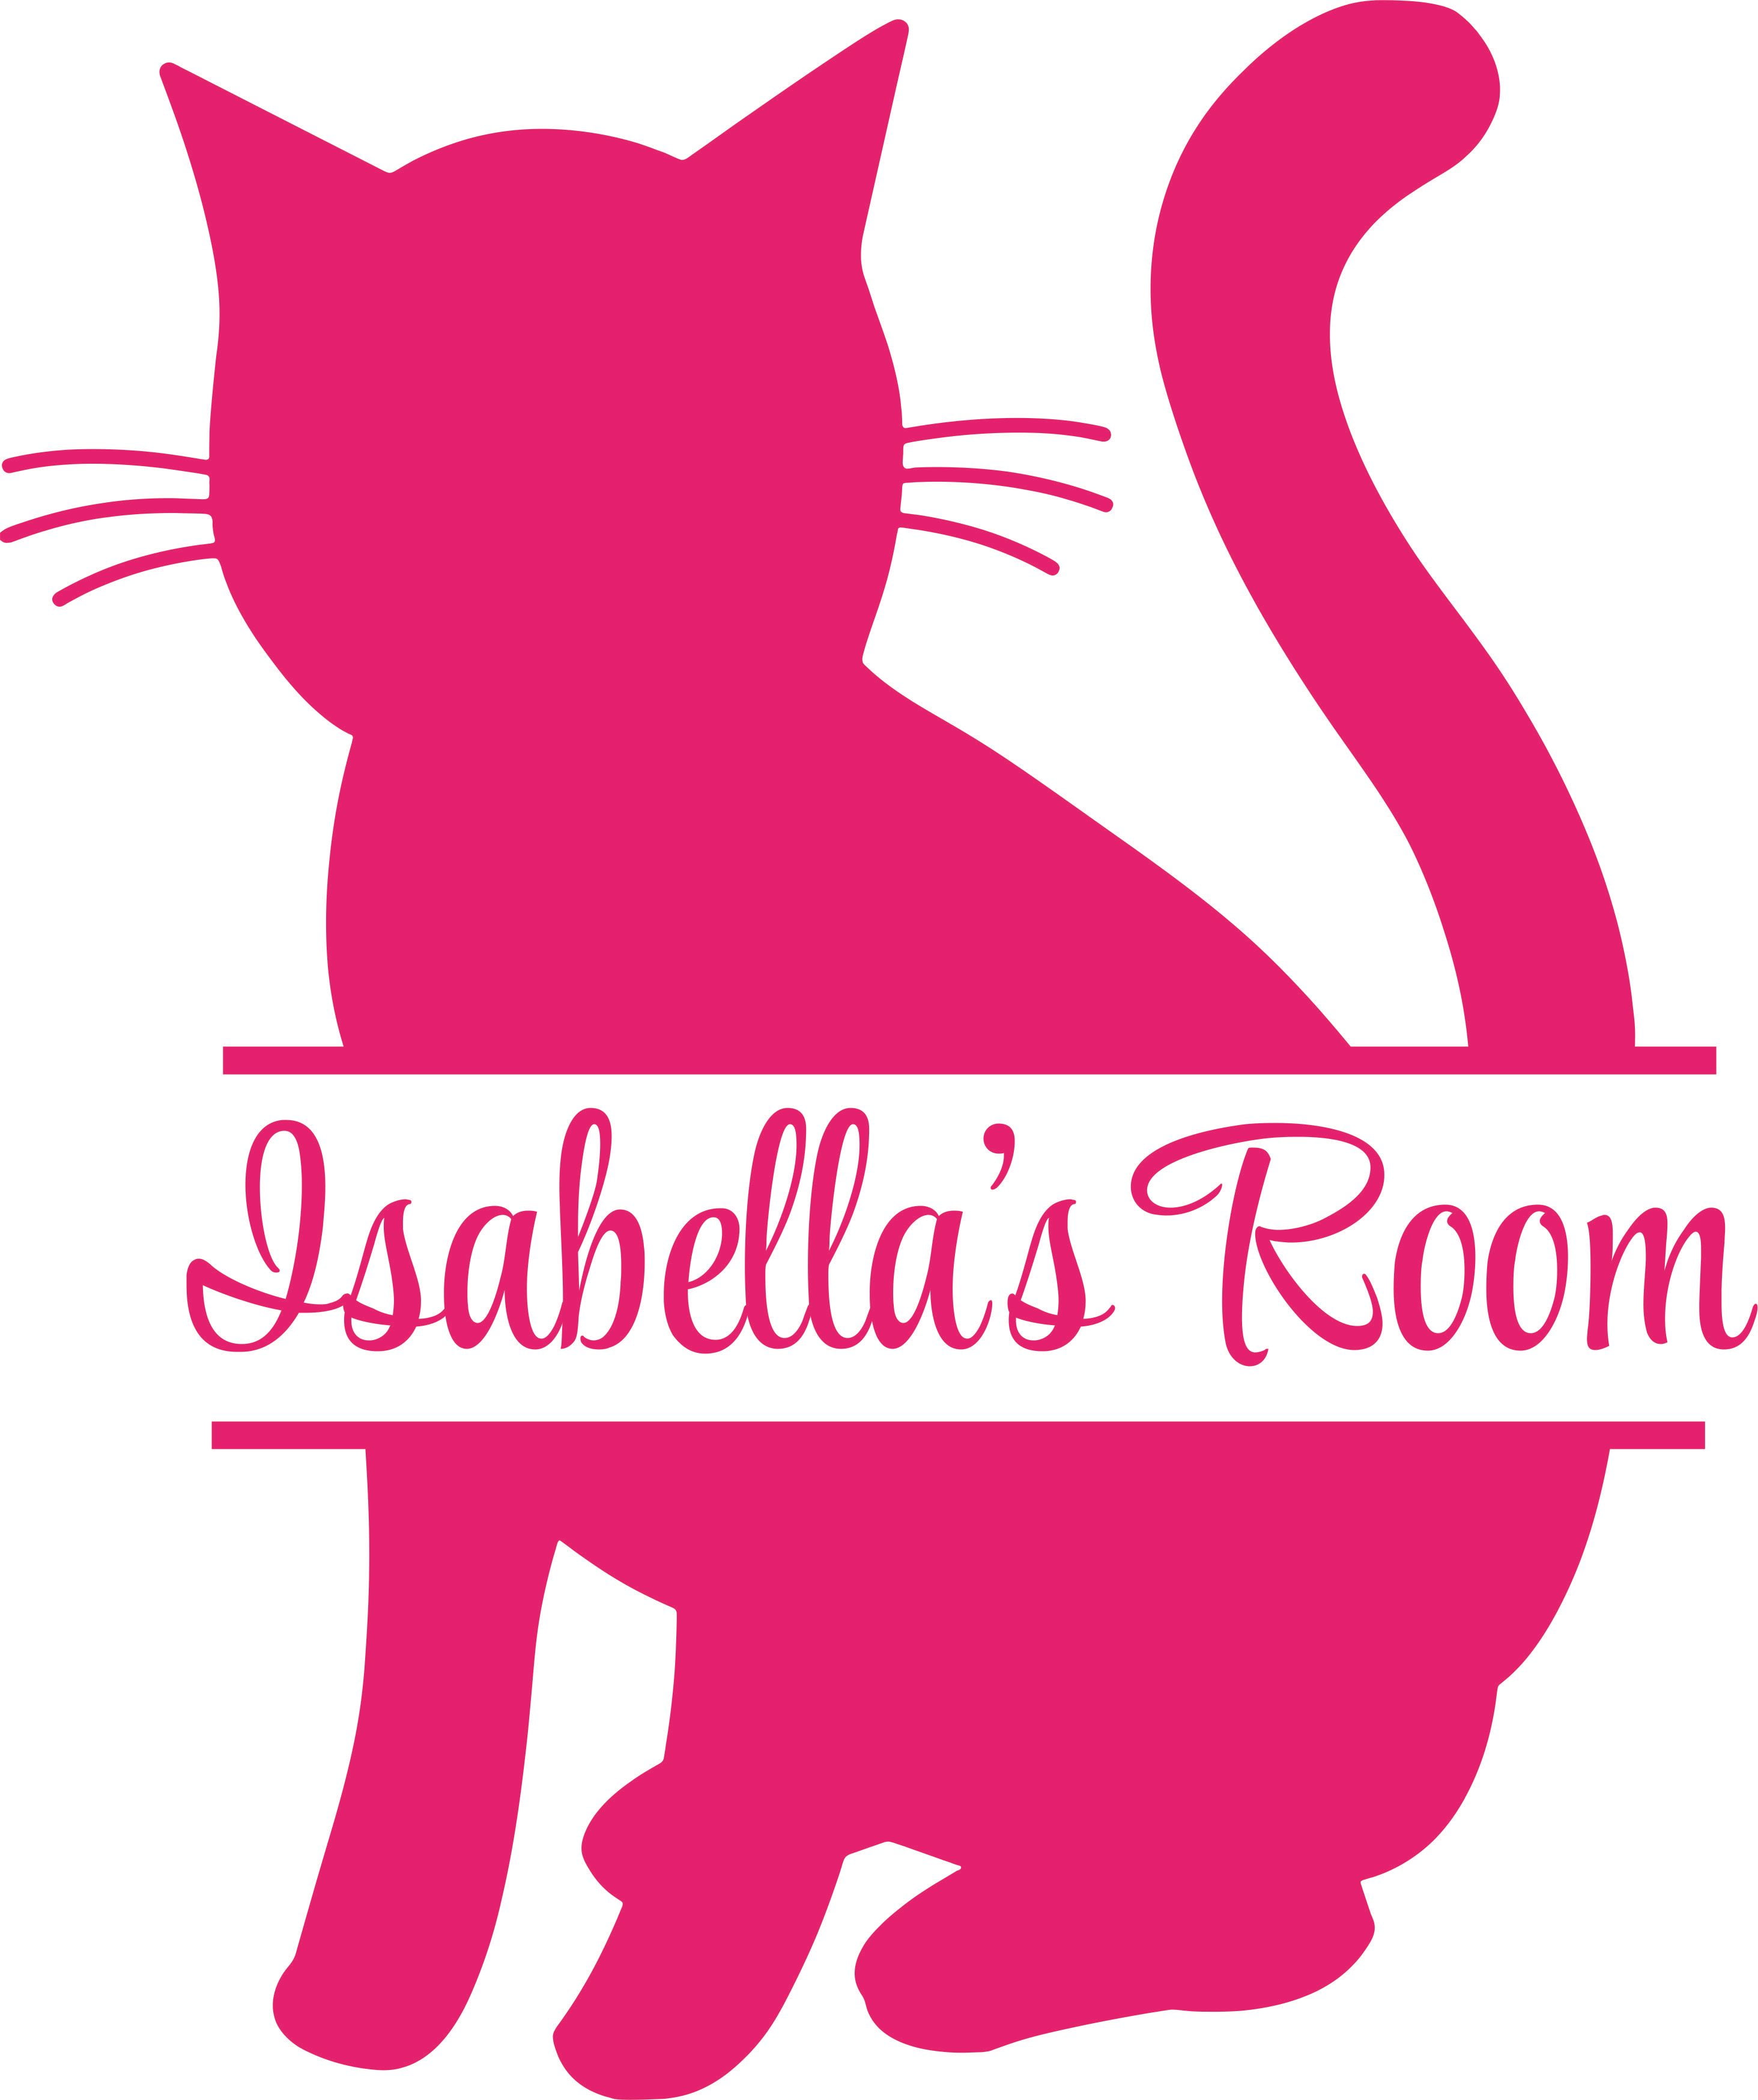 Baby Nursery Personalized Cat Name Wall Decal Playroom or School Classroom Hanging Kitty Silhouette Vinyl Sticker for Kids Bedroom